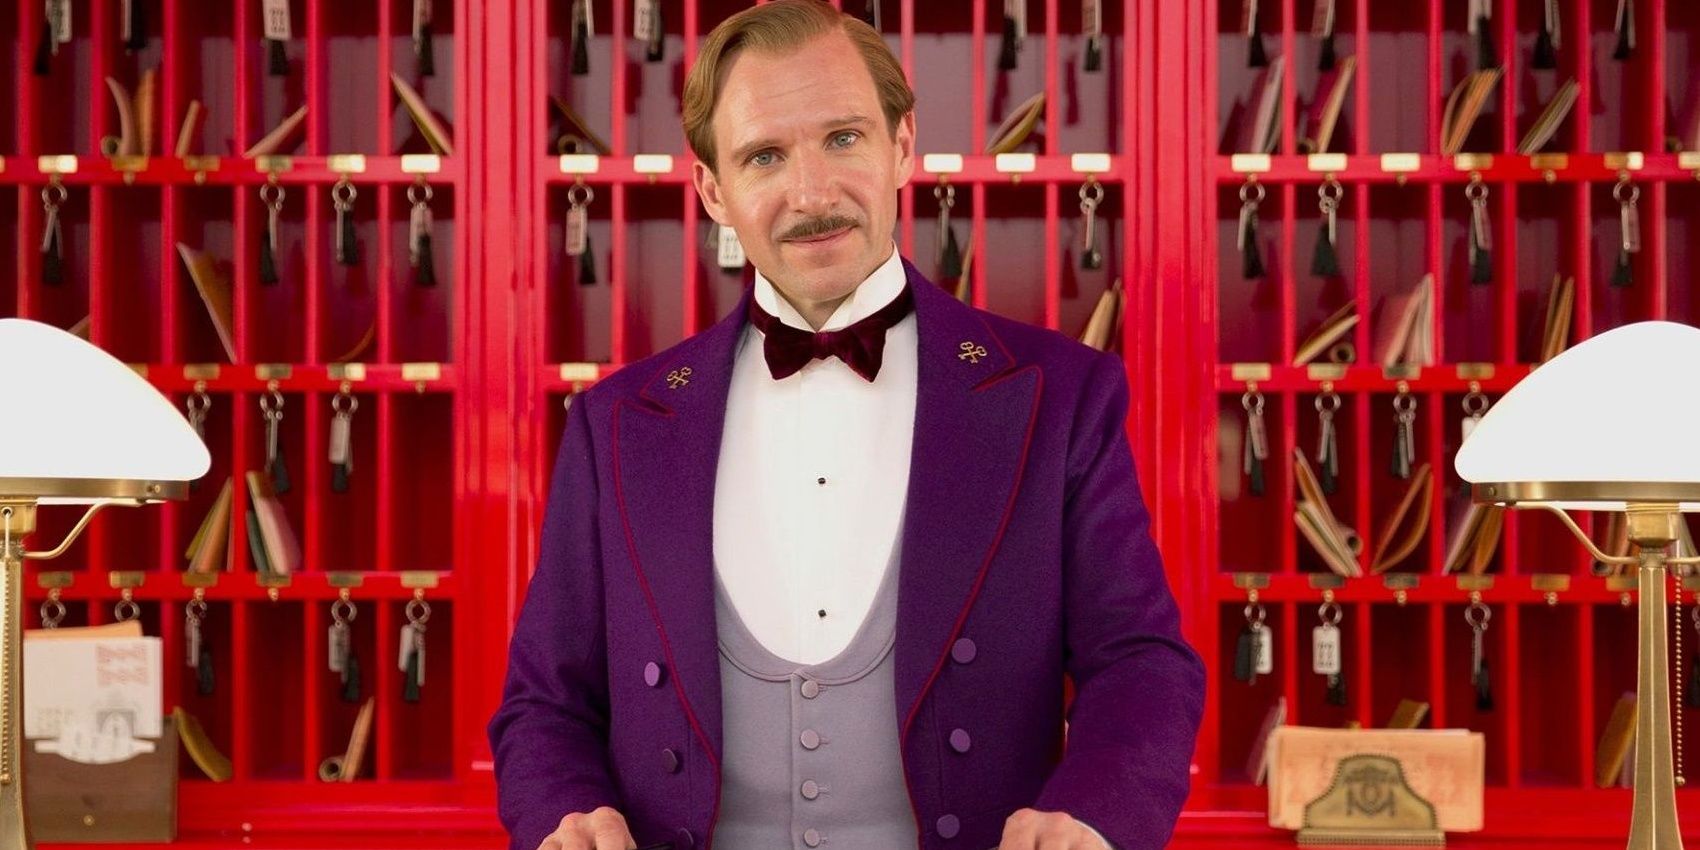 M. Gustave in a purple suit in The Grand Budapest Hotel